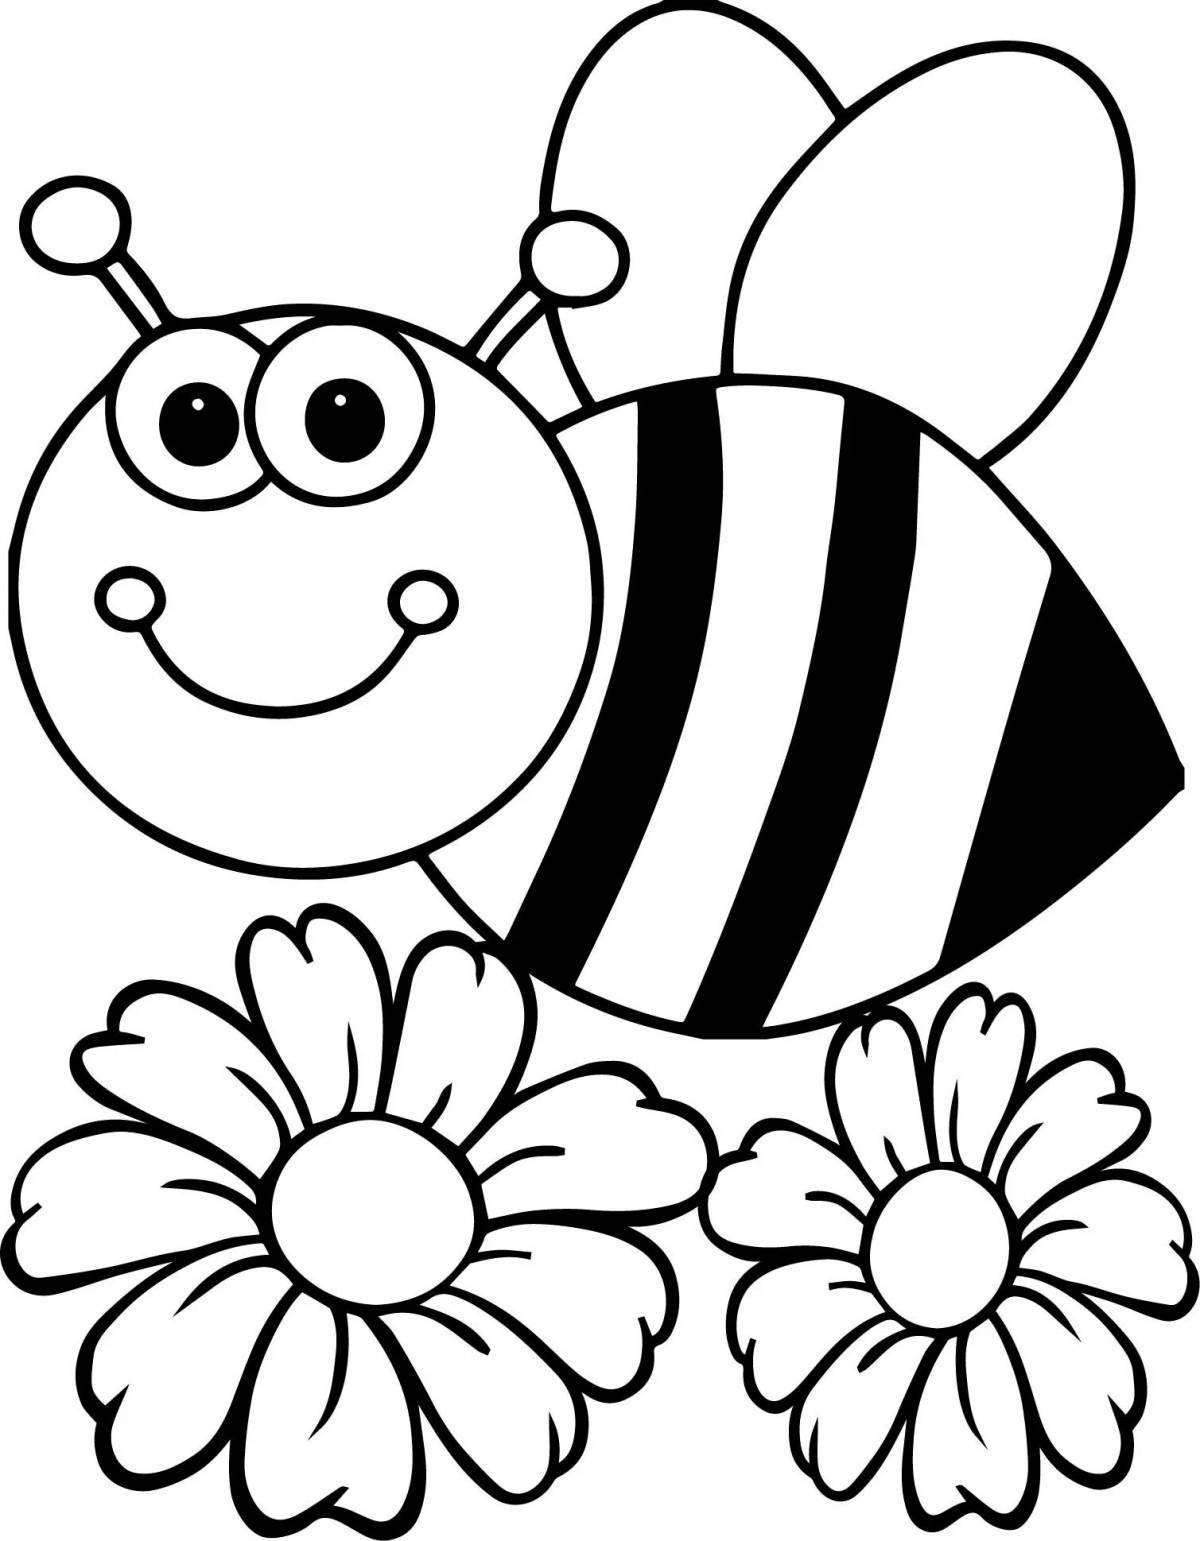 Adorable cat and bee coloring page